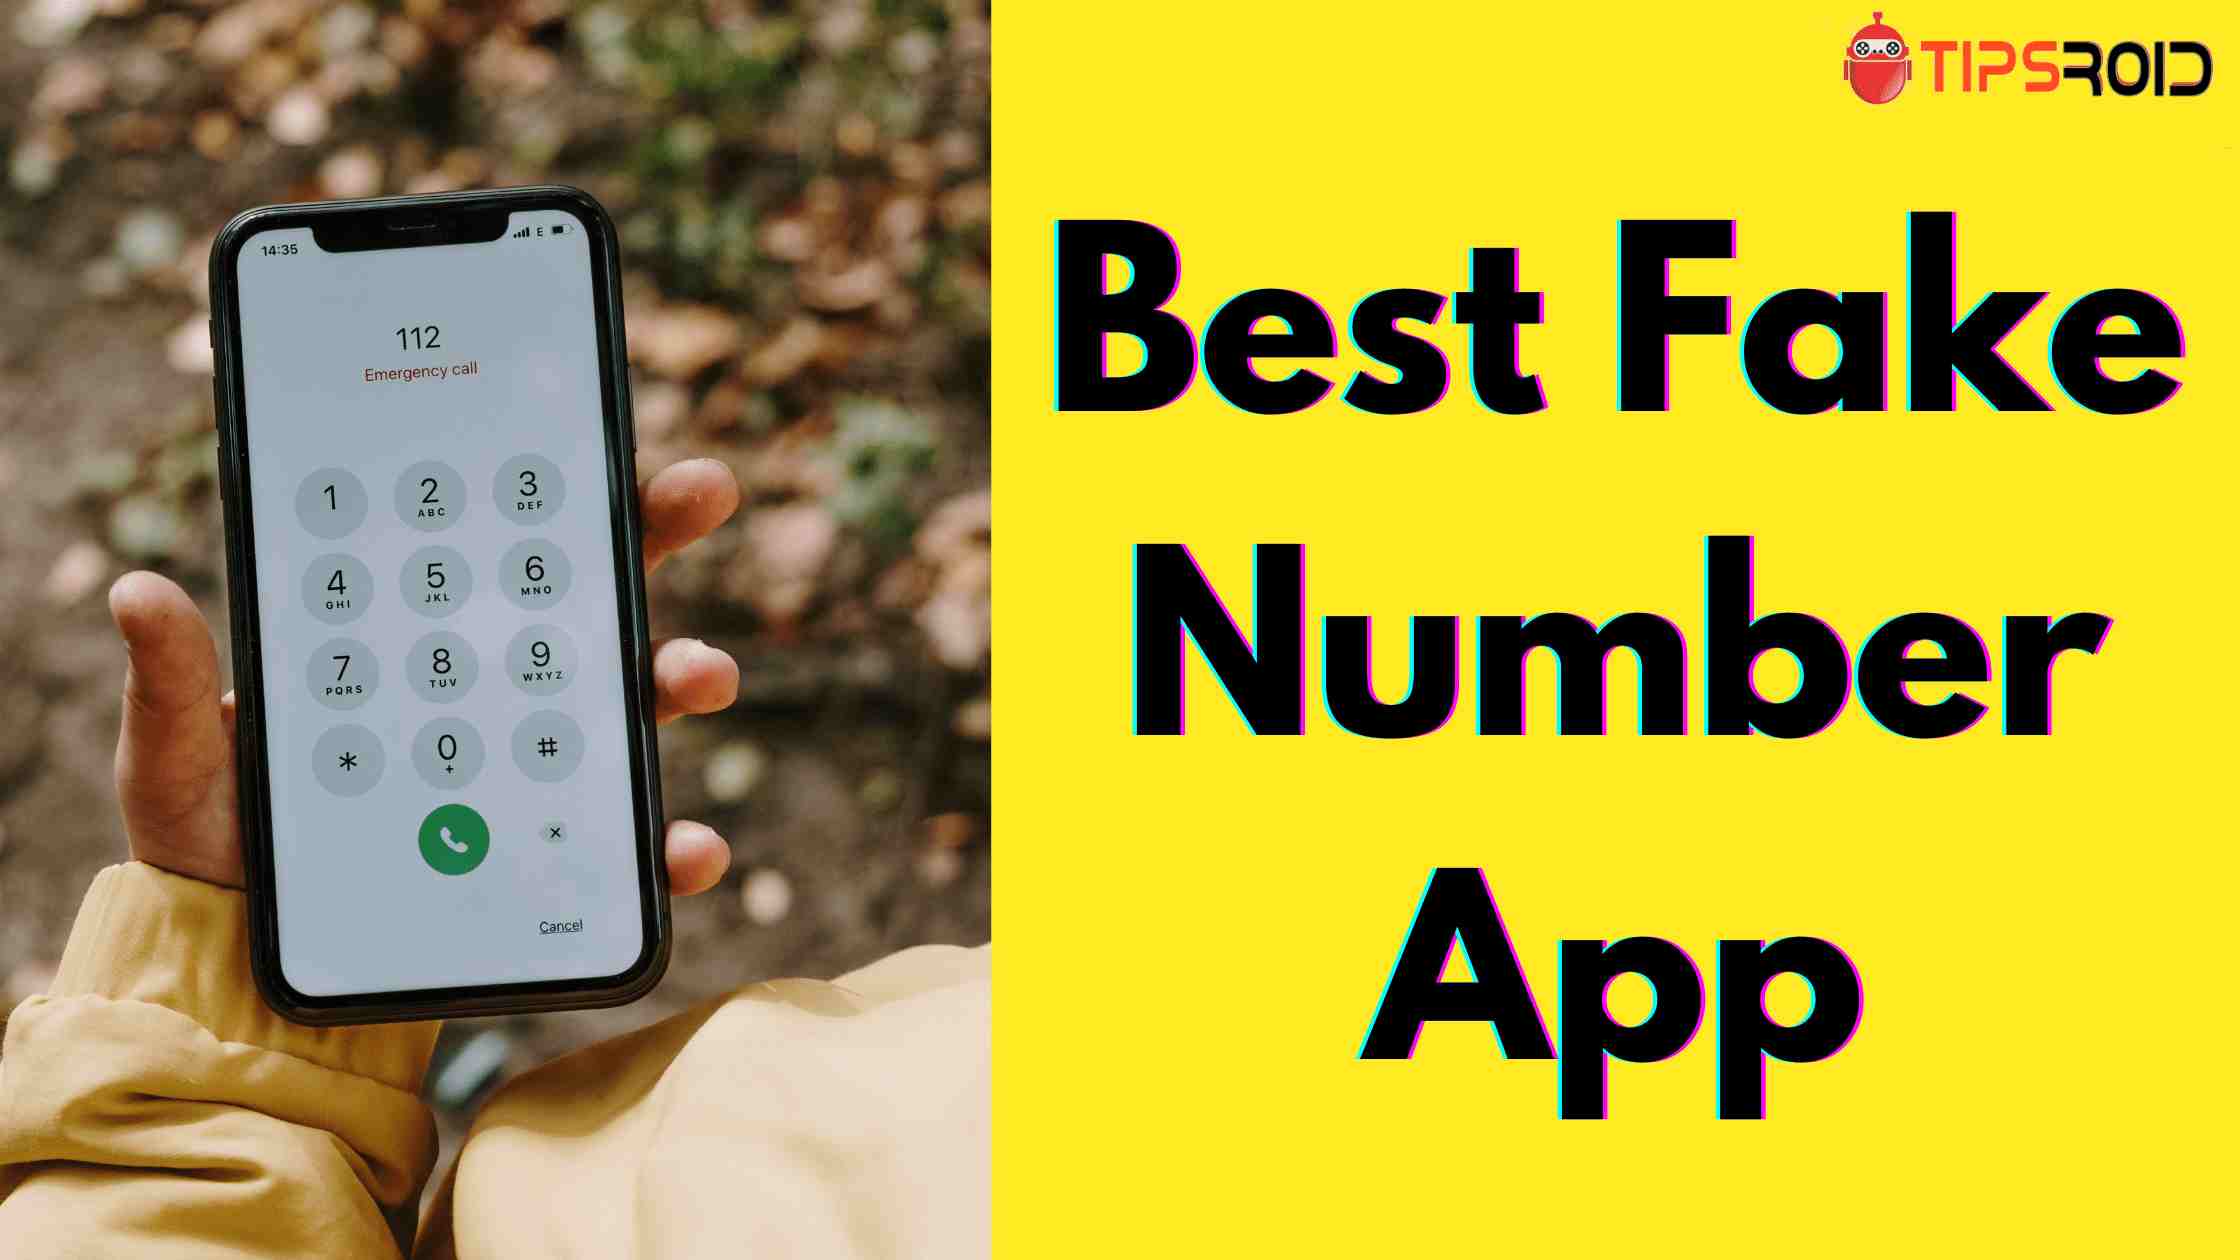 10 Best Fake Number App for Android and iPhone